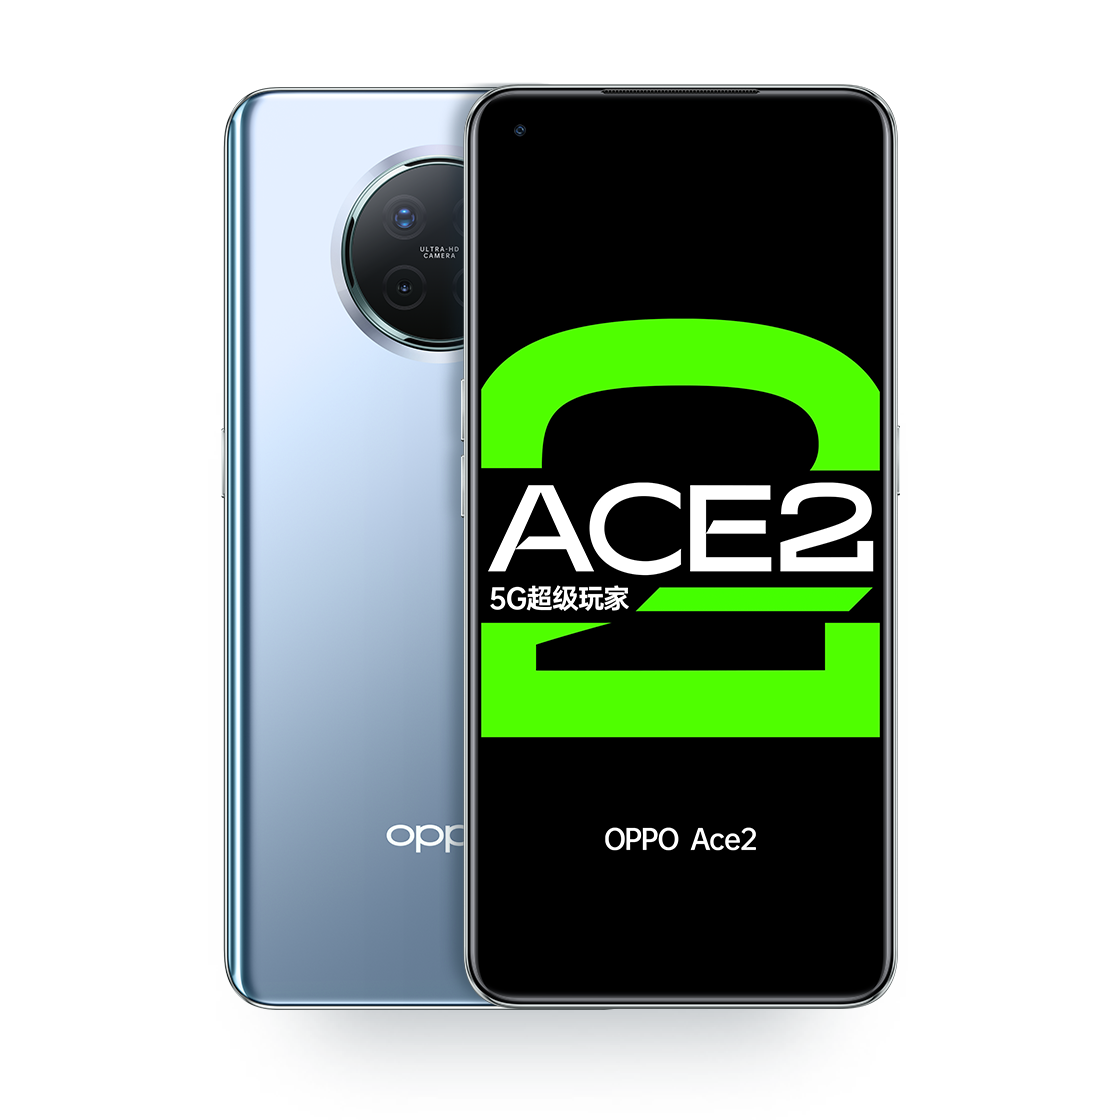 Rumor: OPPO has killed off the Ace line; Realme will have a “replacement” next year